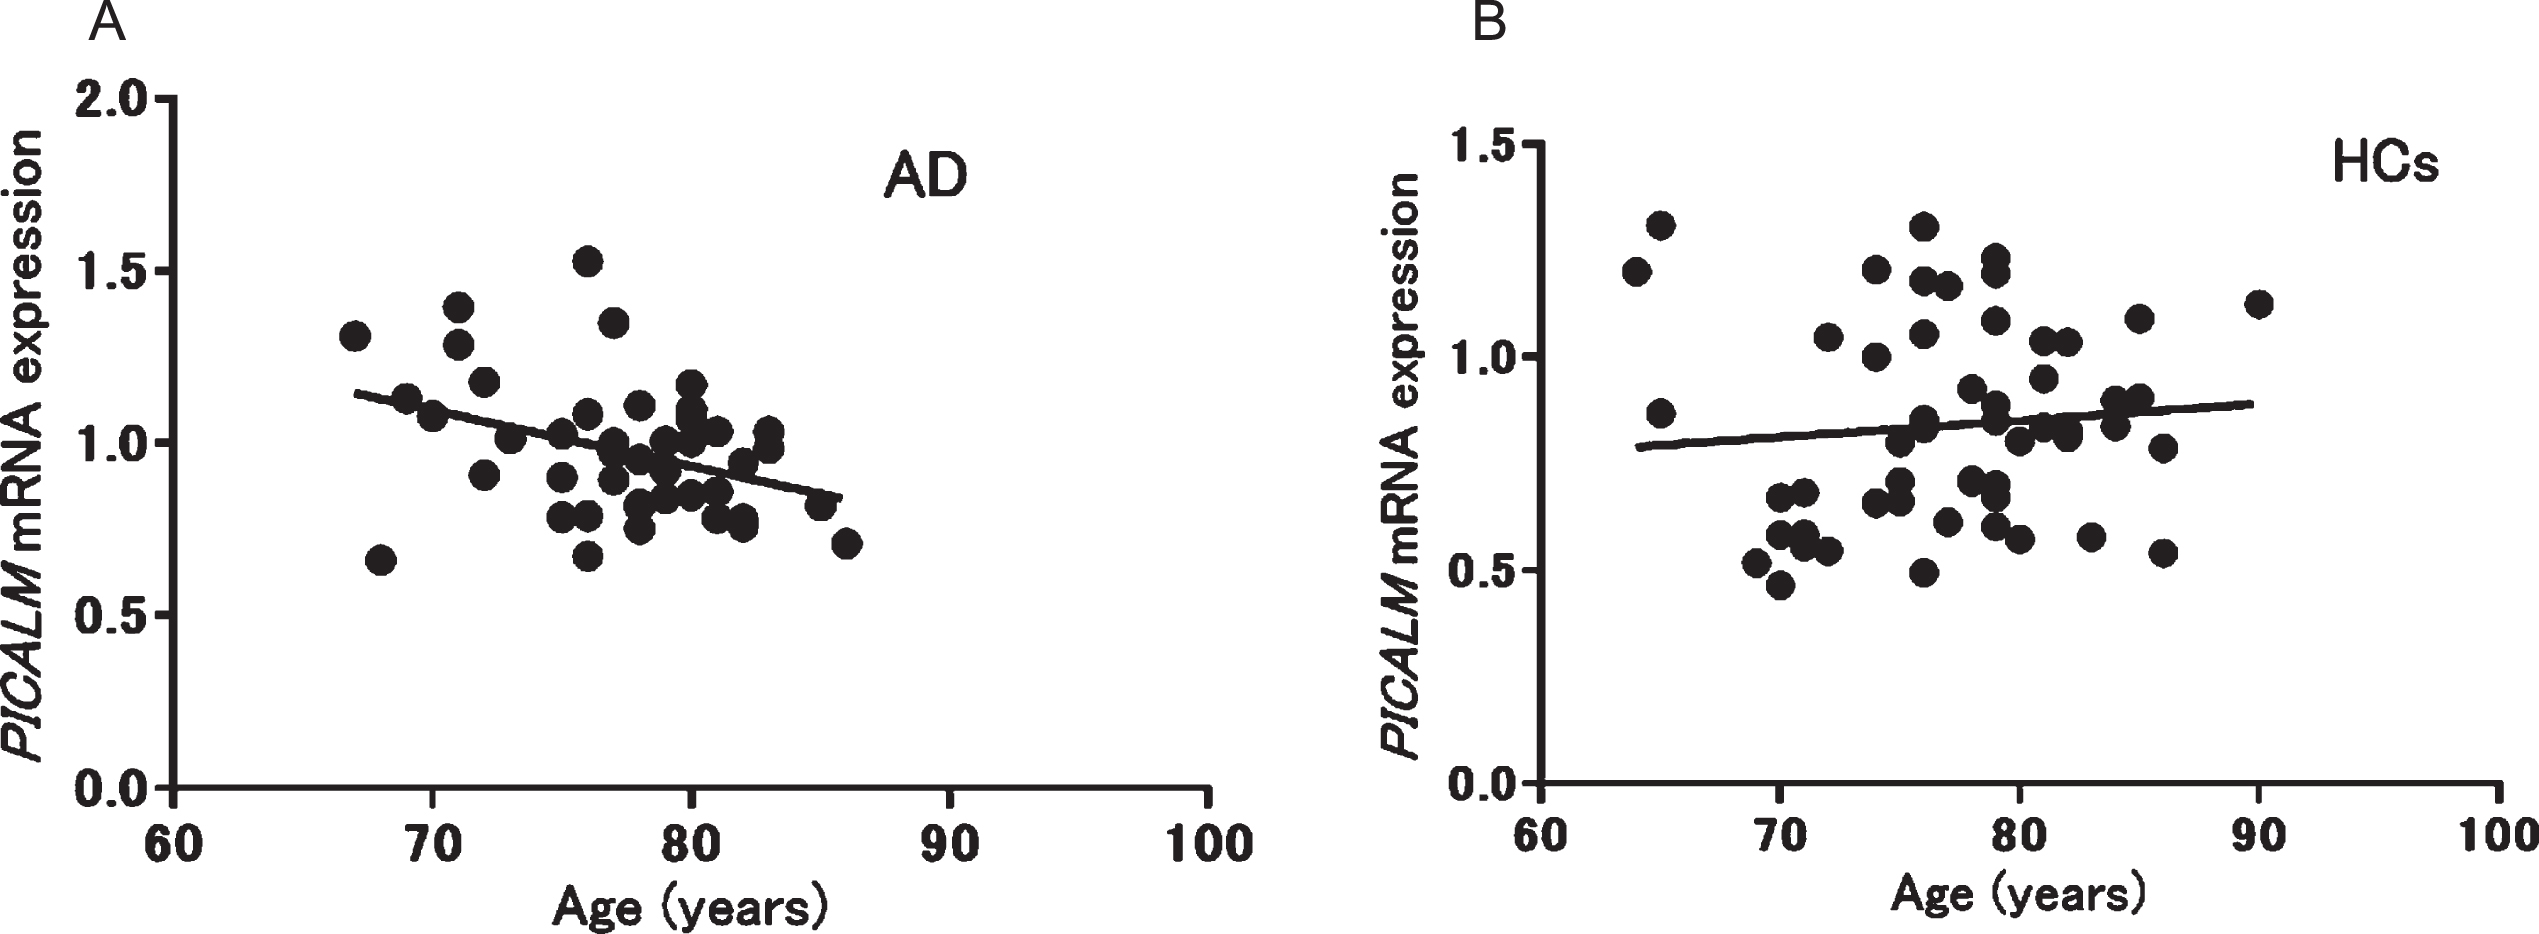 
            Correlation between PICALM mRNA expression and age in patients with Alzheimer’s disease (AD; A: r = –0.37, p = 0.013) and healthy controls (HCs; B: r = 0.10, p = 0.48).
          